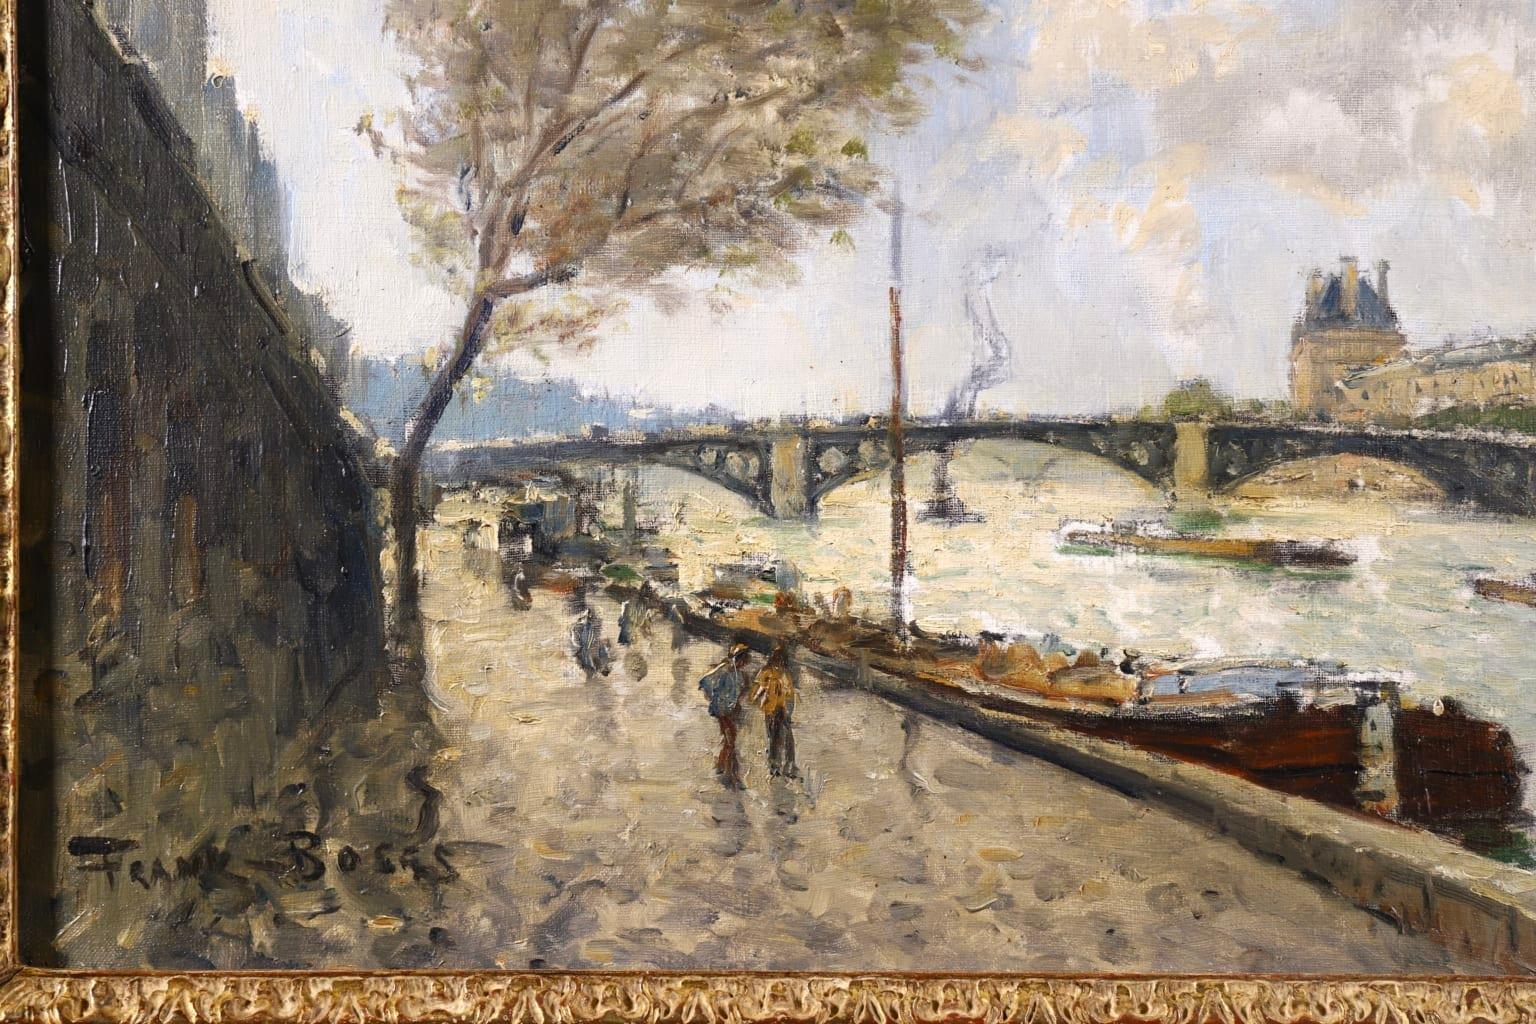 View of the Seine, Paris - Impressionist Oil, Riverscape by Frank Myers Boggs 1